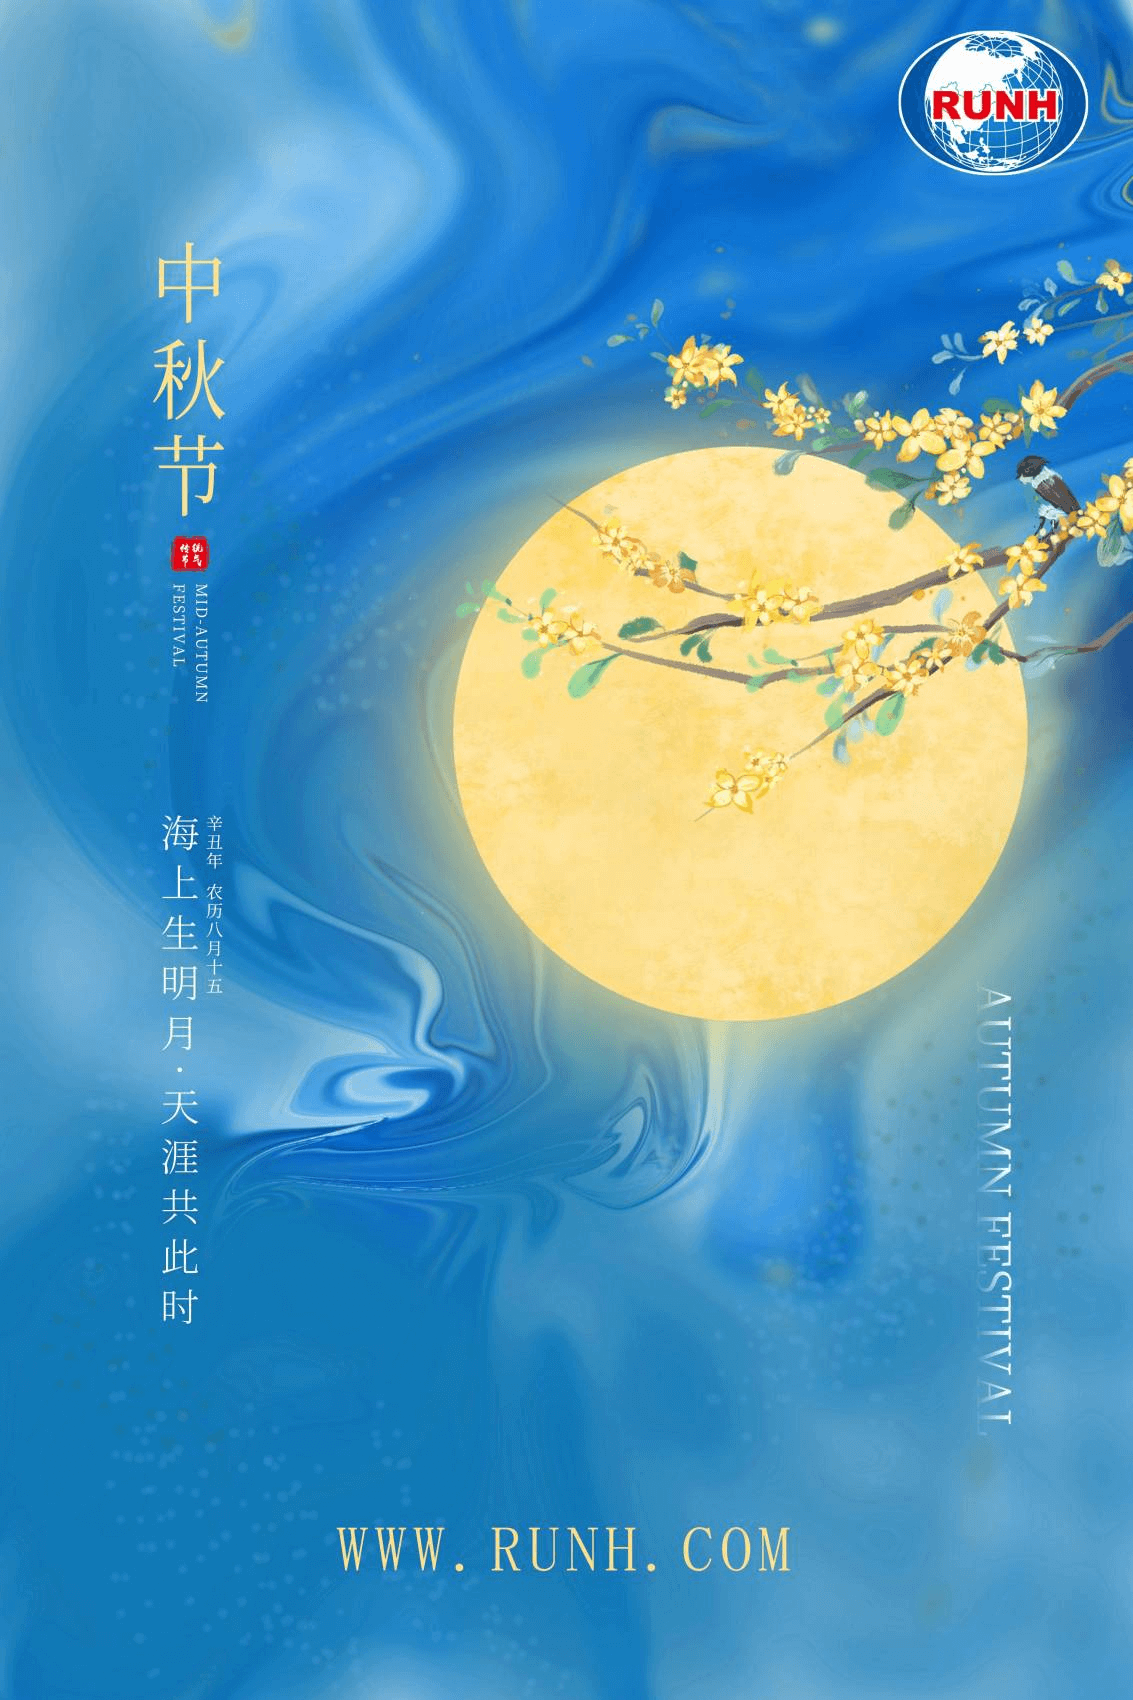 Runh Power wish you a happy Mid-Autumn Festival!